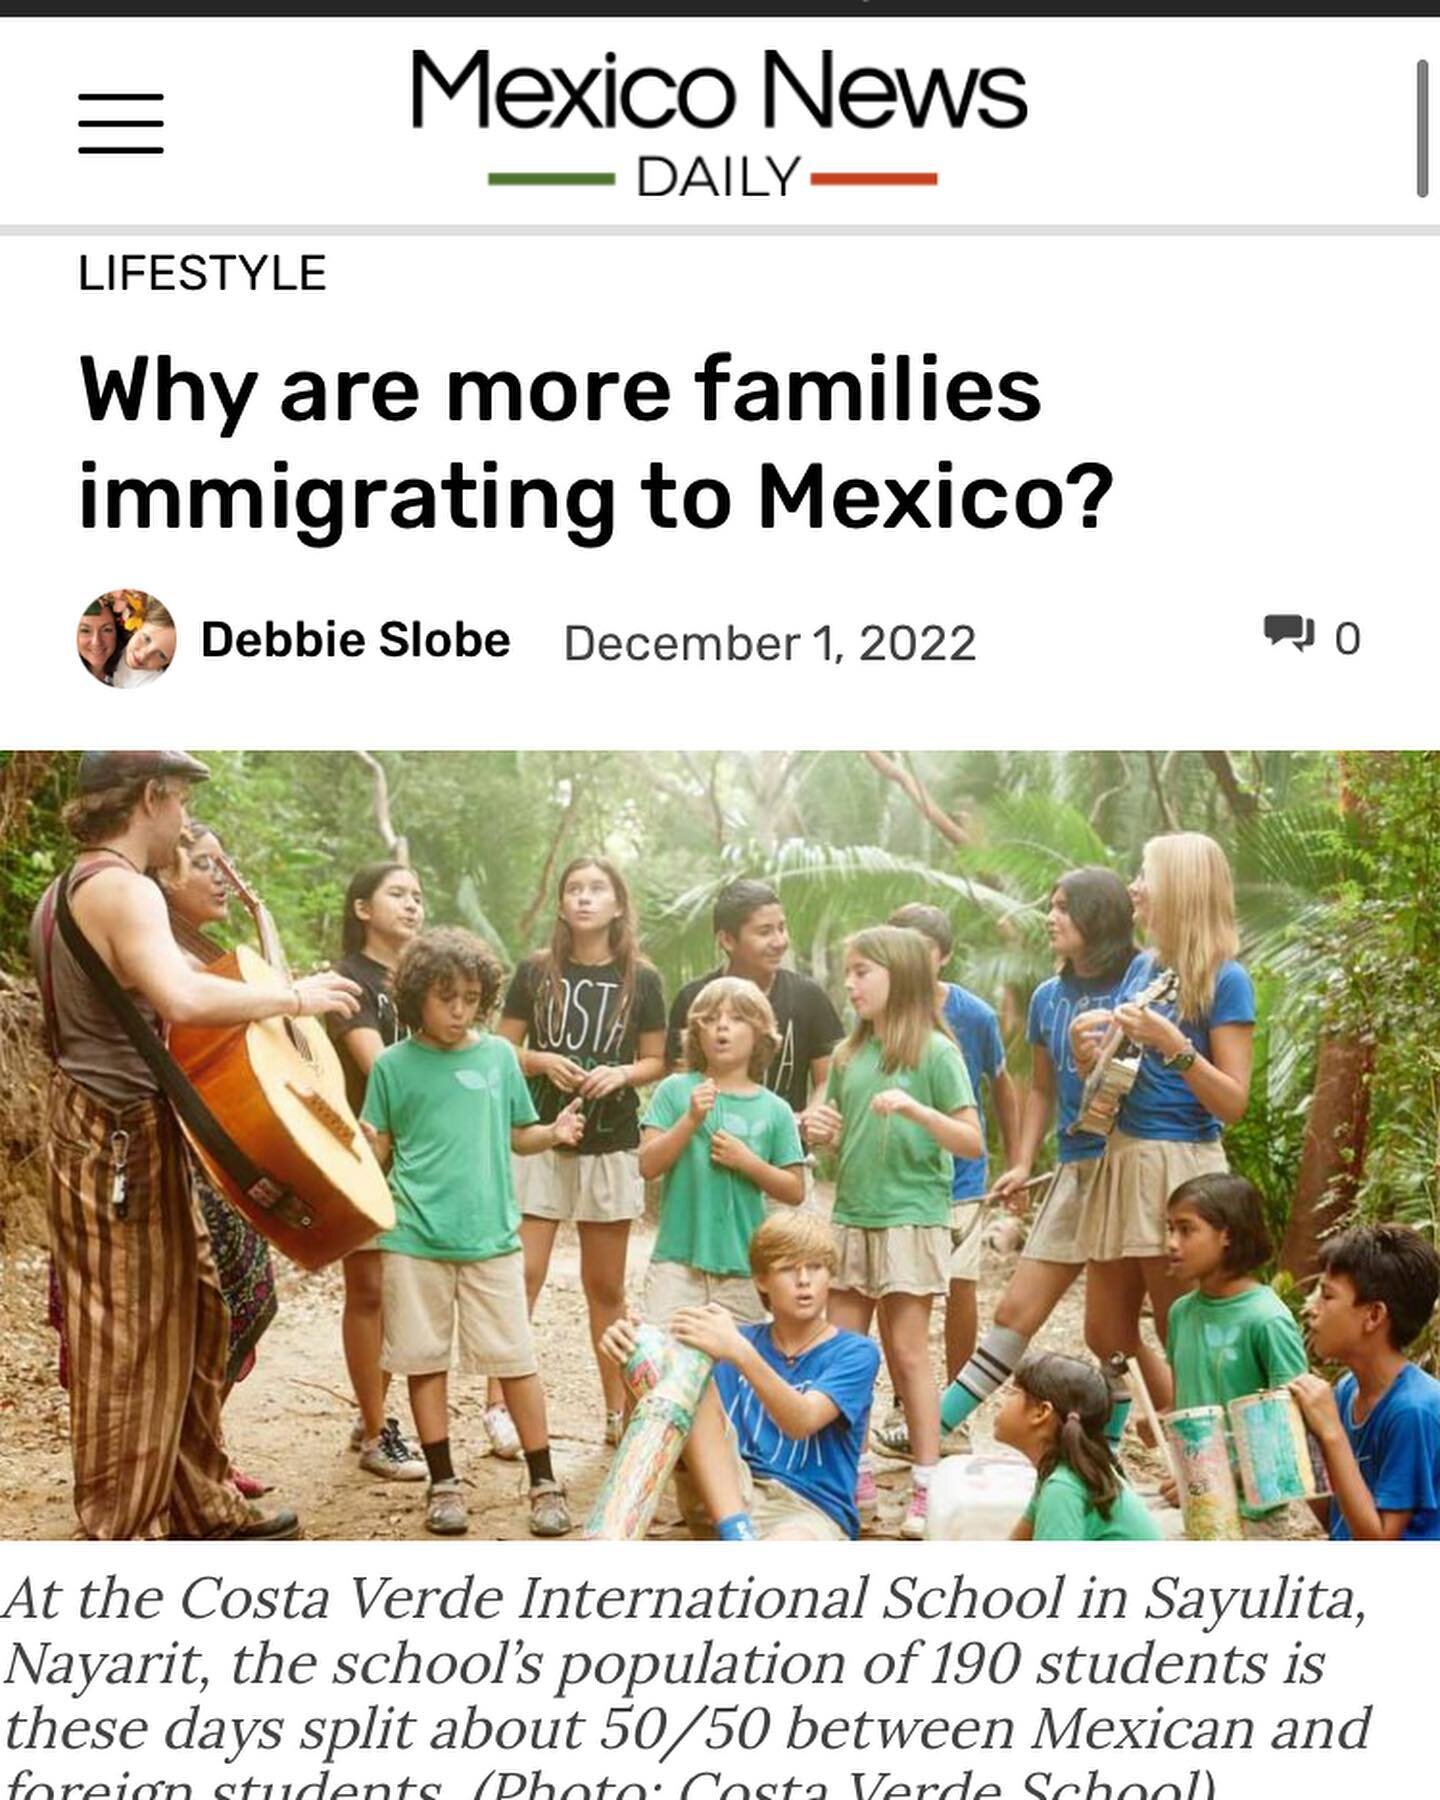 Read about us in Mexico News Daily! &iexcl;Estamos en las noticias!

https://mexiconewsdaily.com/lifestyle/why-are-more-families-immigrating-to-mexico/?fbclid=PAAaY2Gn9ldwNTNrEOy4kWazNpOLto4v29gcAtslk7zqBbQgEhaj8Z6mKA9LQ